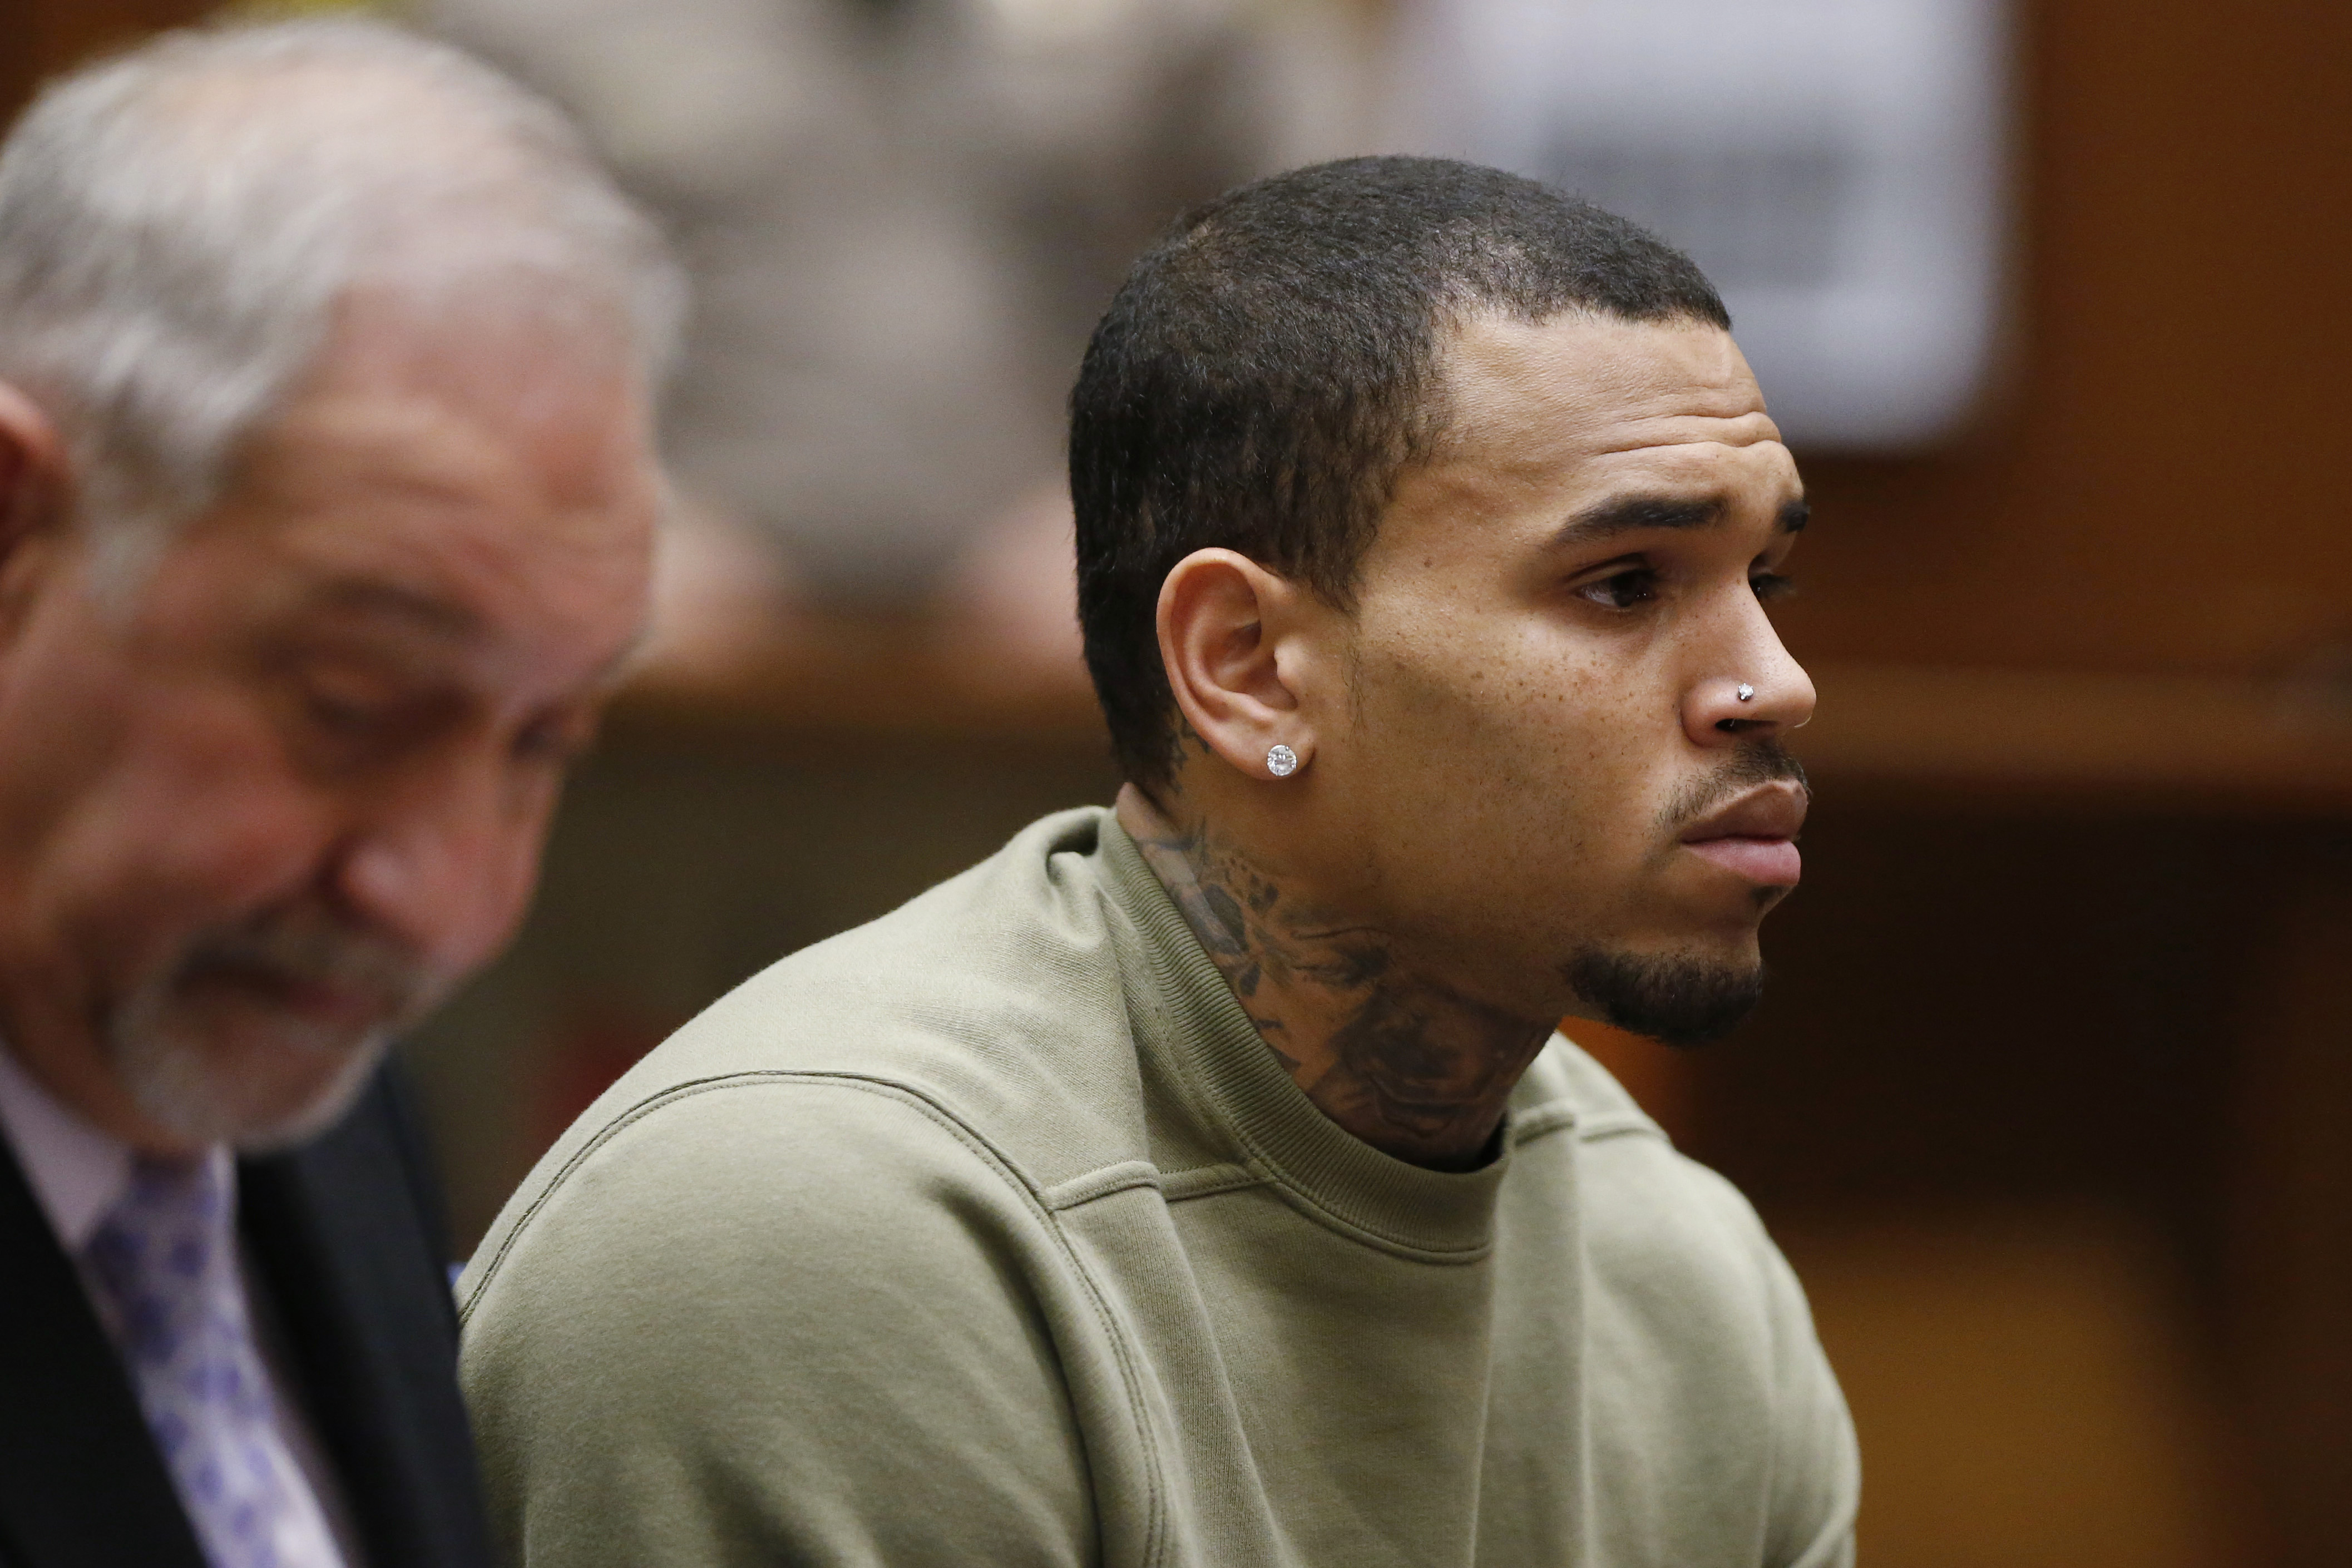 Singer Chris Brown (R), who pleaded guilty to assaulting his girlfriend Rihanna, appears in court with his lawyer Mark Geragos for a progress hearing, in Los Angeles, California, January 15, 2015. (Lucy Nicholson—Reuters)